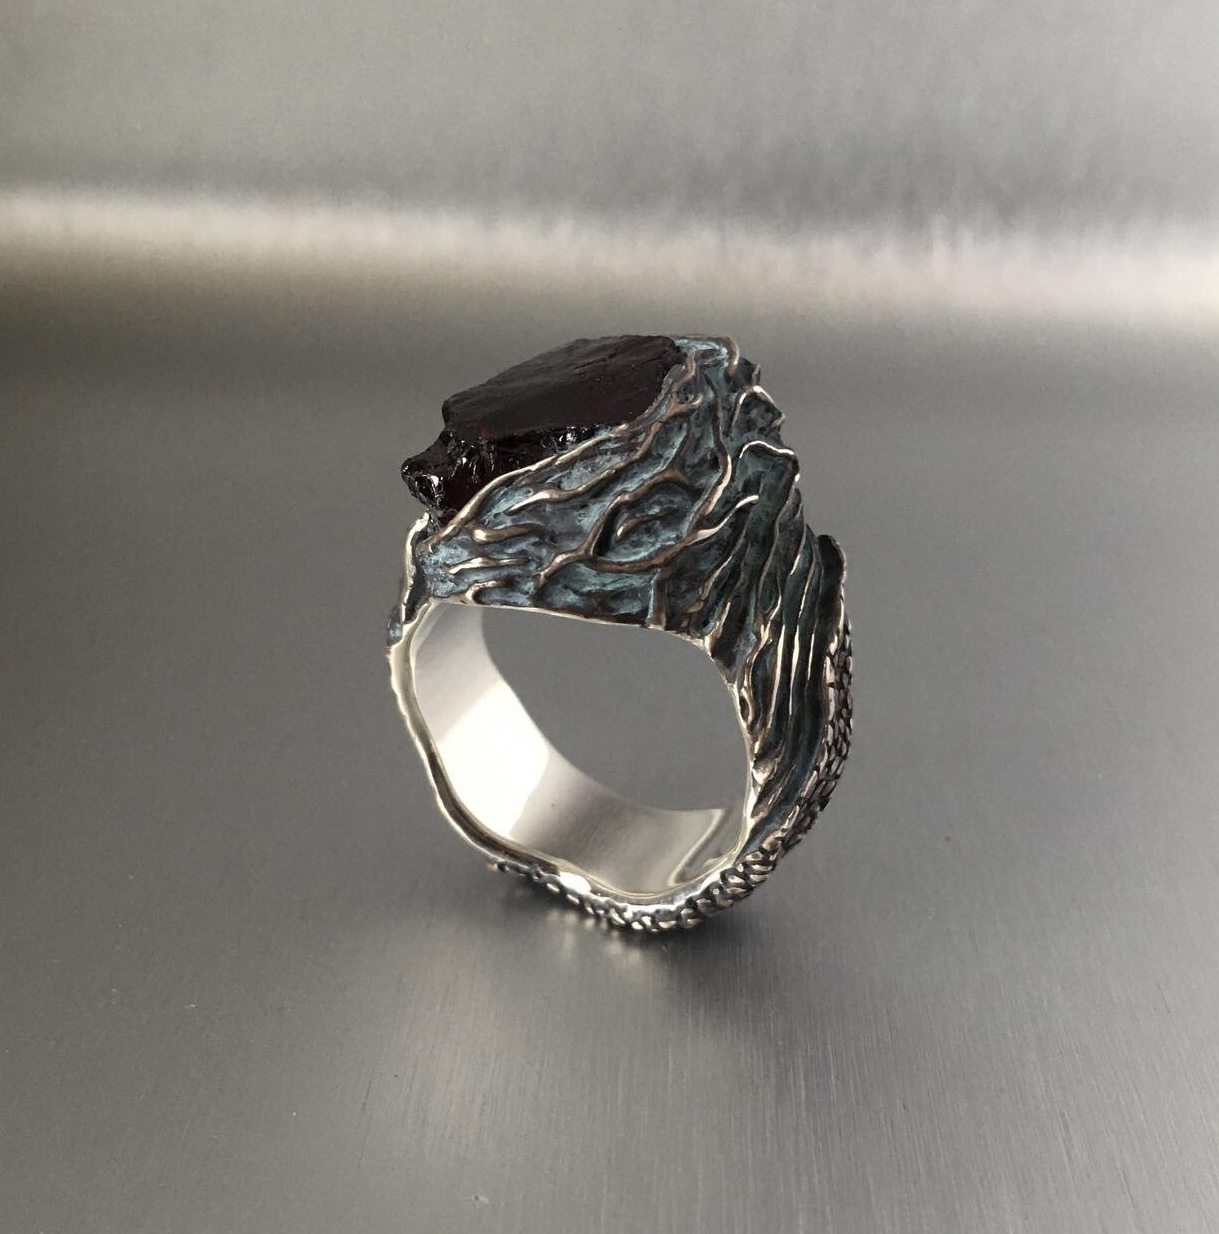 Jewelry underground: Carrion - My, Garnet, Handmade, Ring, Patina, With your own hands, Needlework with process, Casting, Underground, Wax, Mat, Longpost